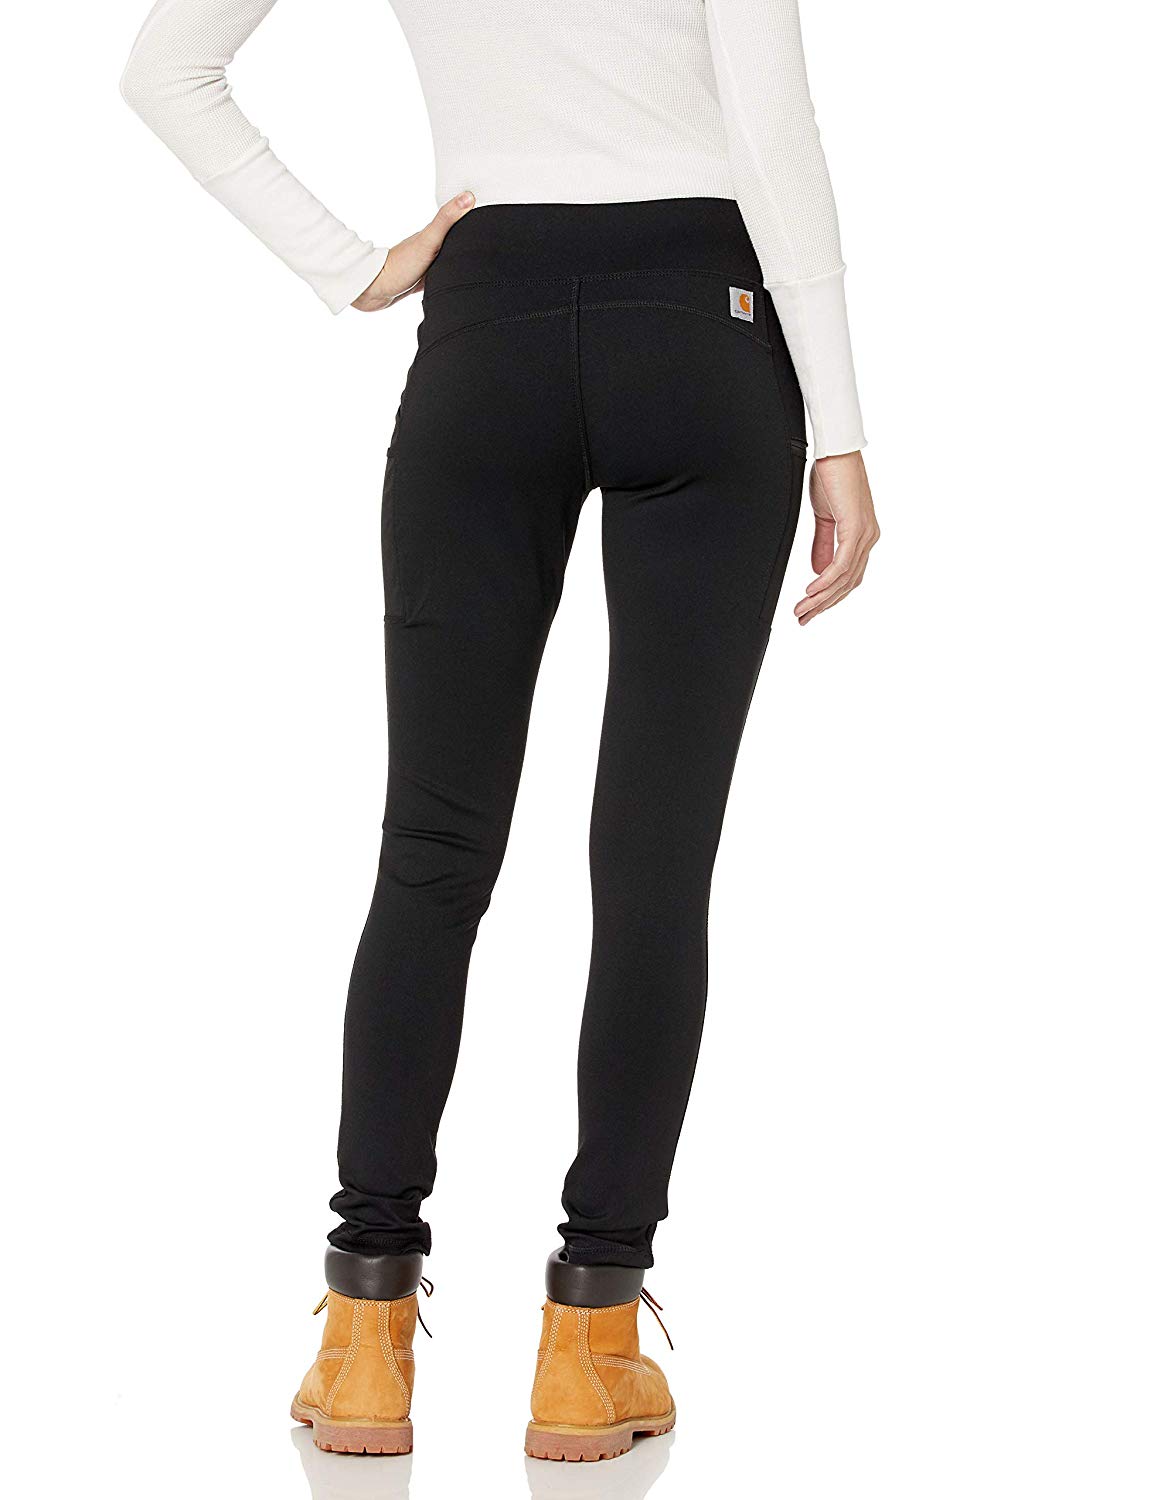 Womens Carhartt Leggings Plus Size Tops For Men  International Society of  Precision Agriculture